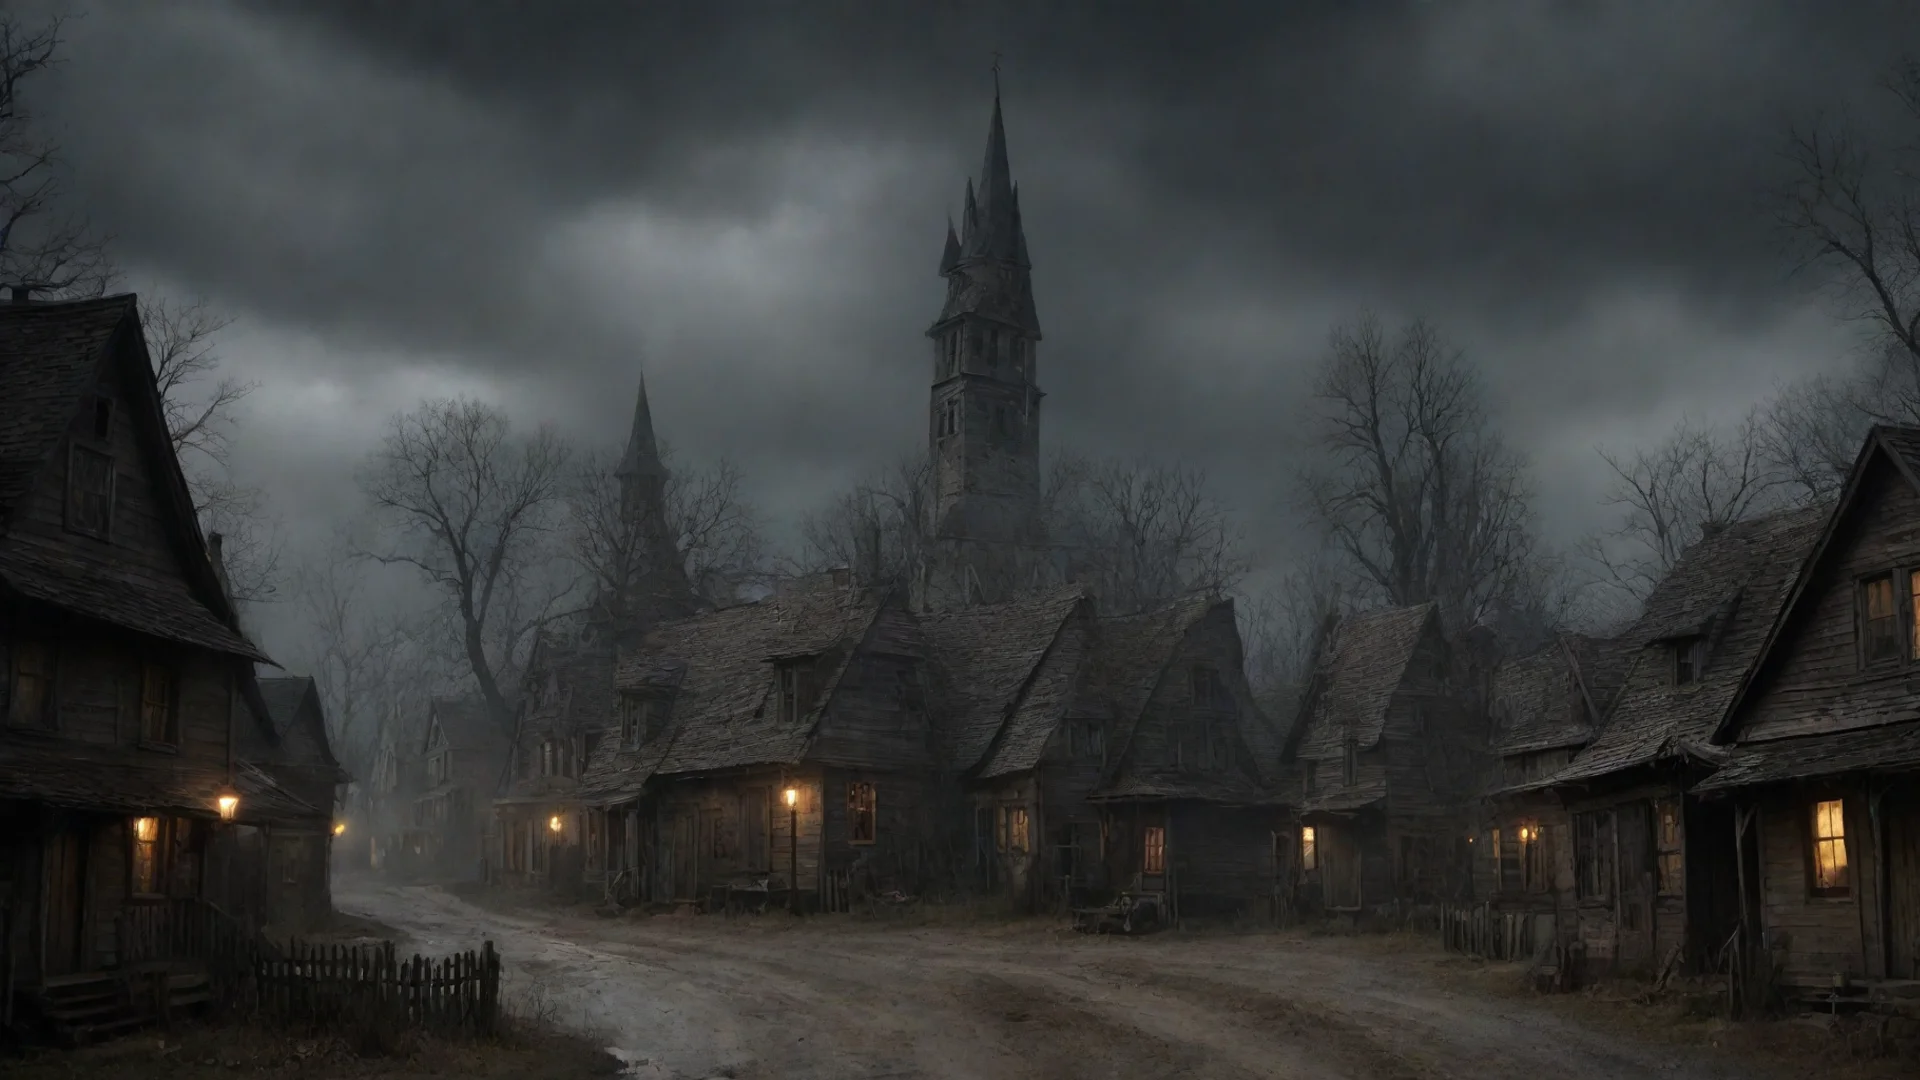 aitrending old spooky town 1800s vampire town steeple olden days windswept hd epic good looking fantastic 1 wide